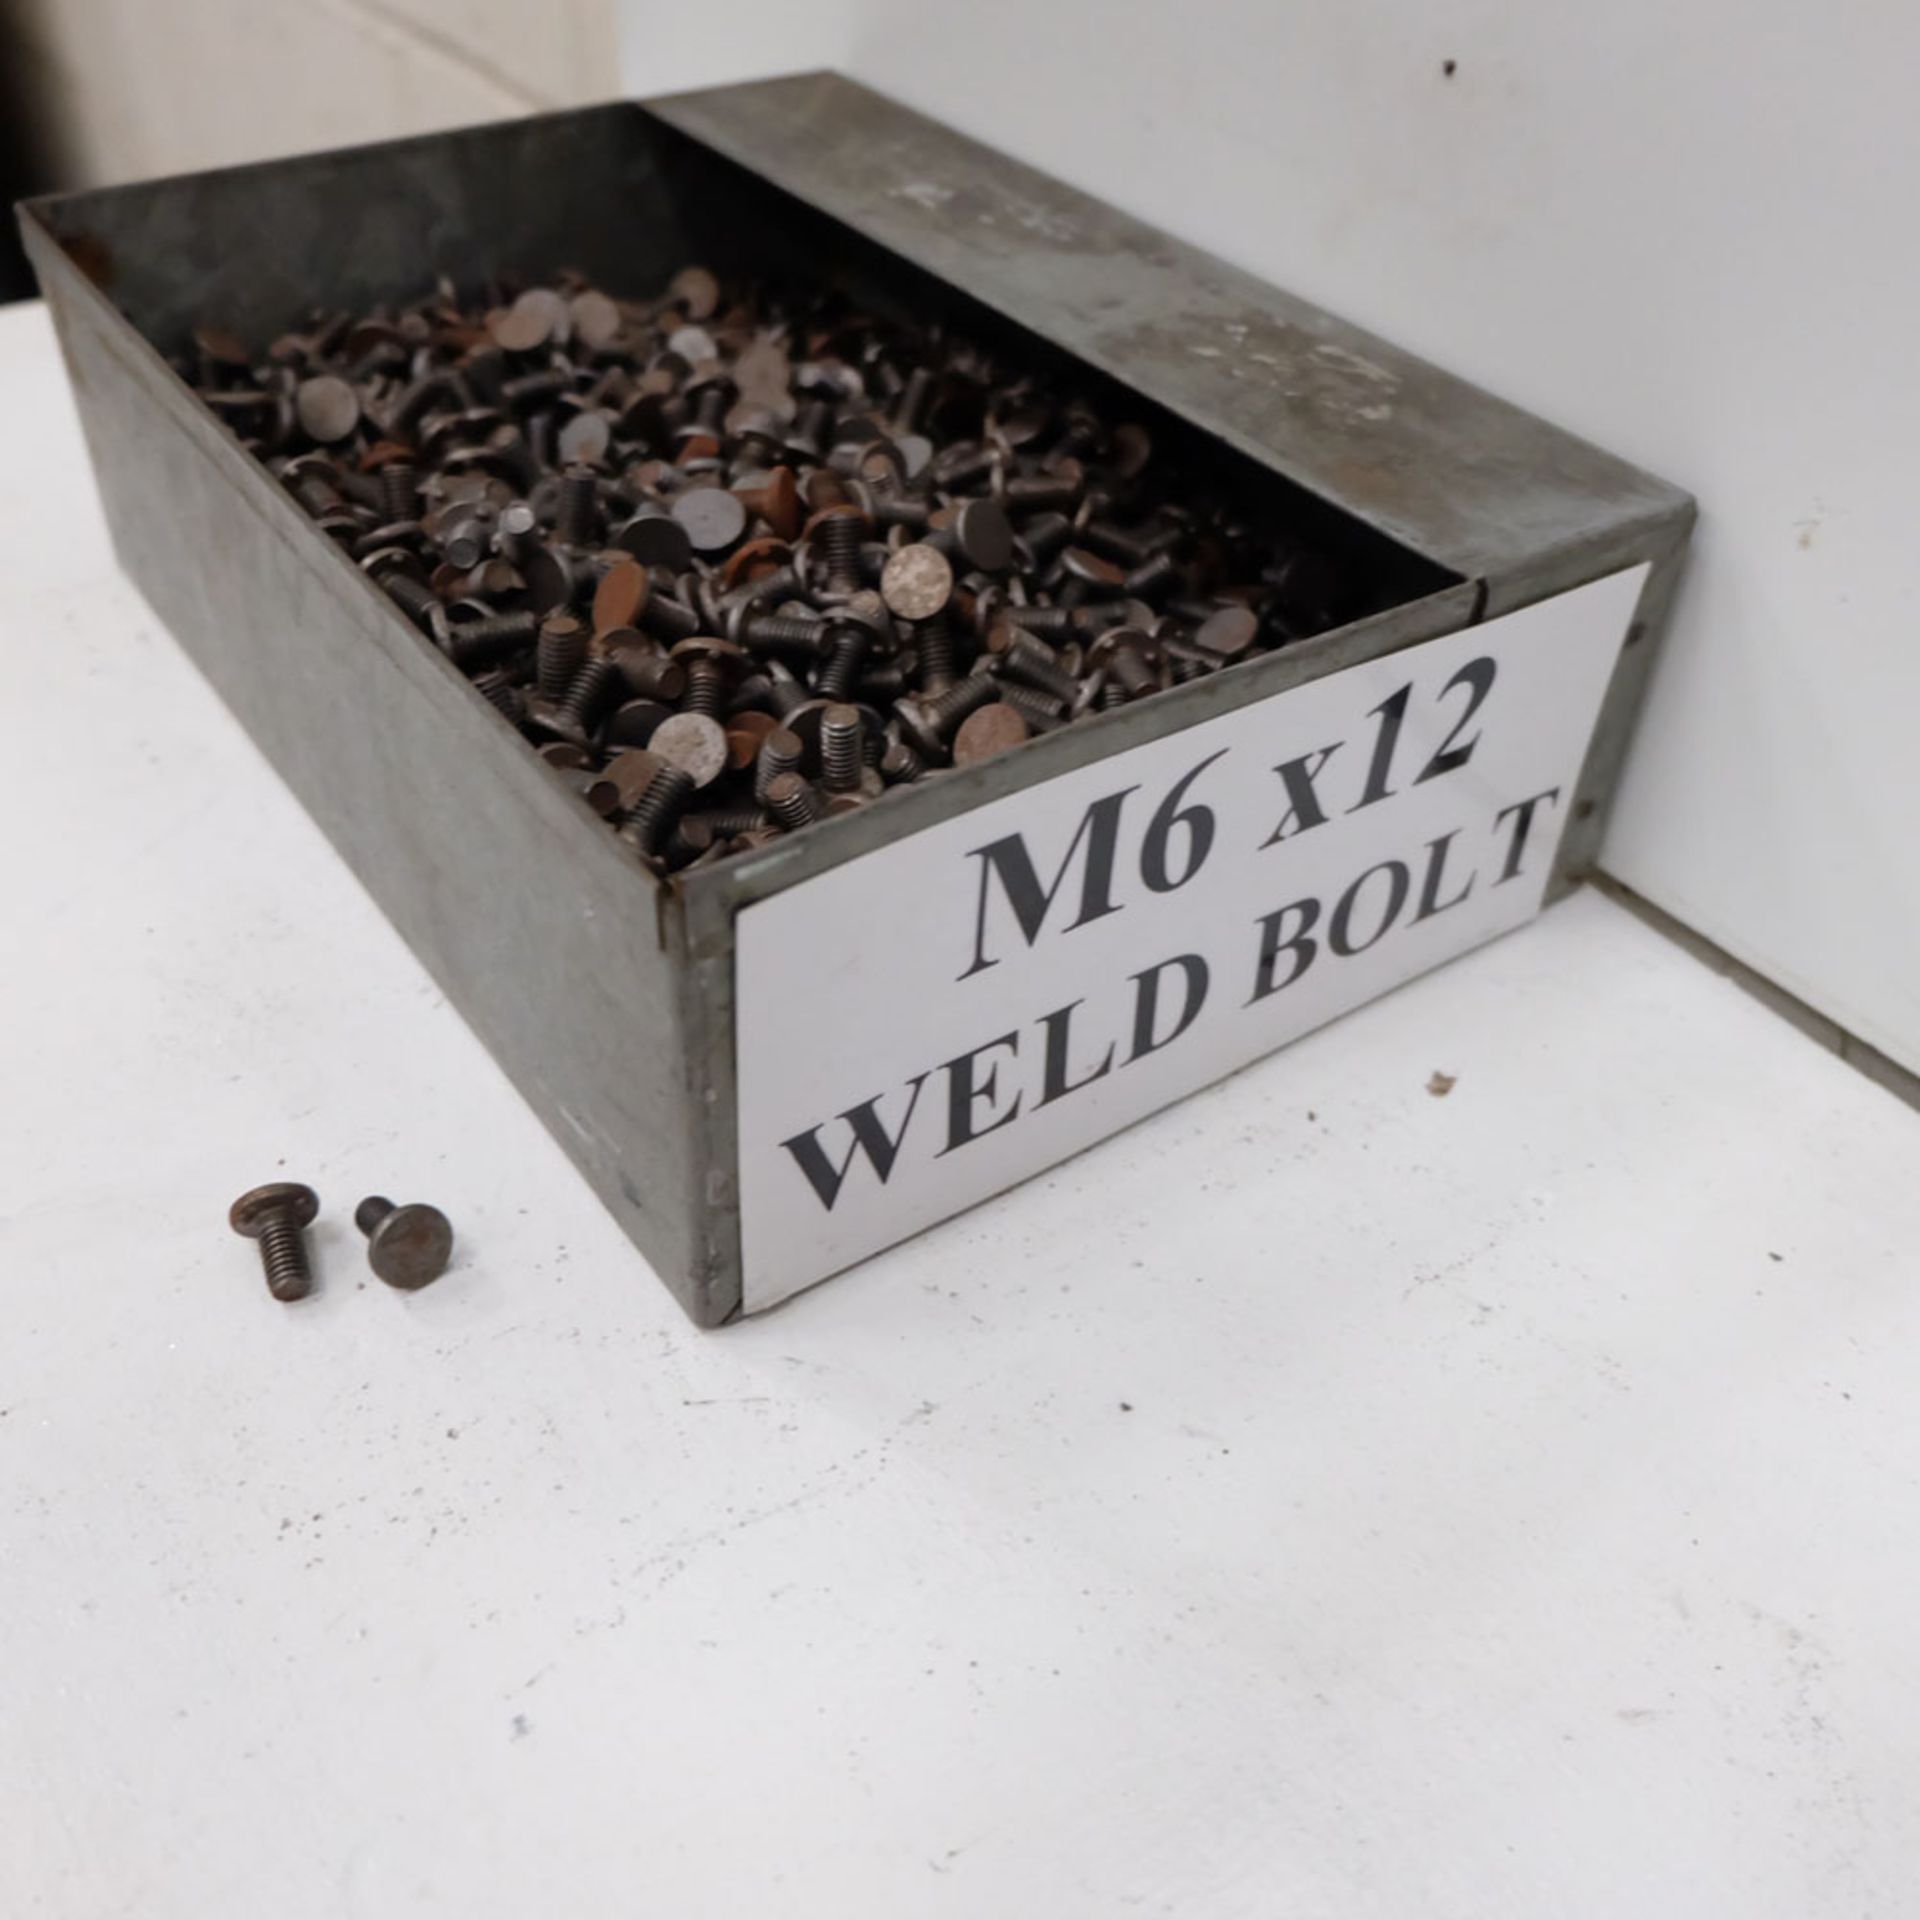 Quantity of Weld Bolts as Lotted. Labelled M6 x 12 Weld Bolt. - Image 4 of 4